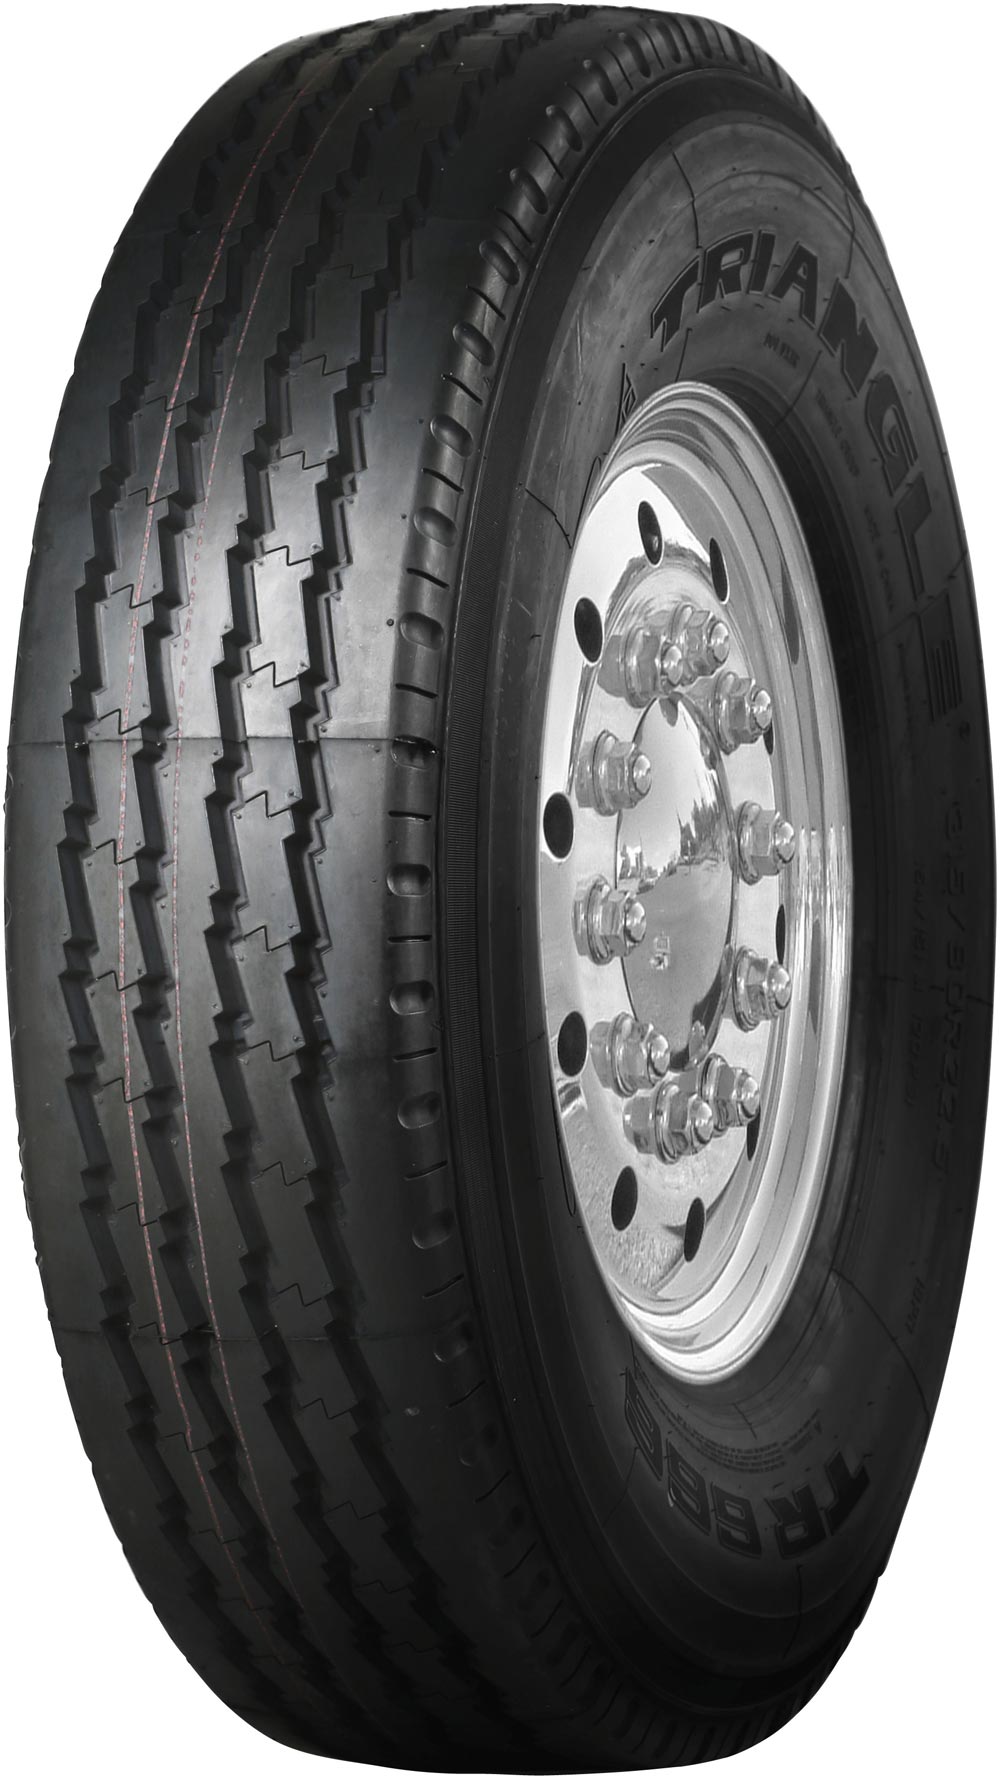 product_type-heavy_tires Triangle TR666 16PR 11 R22.5 148M